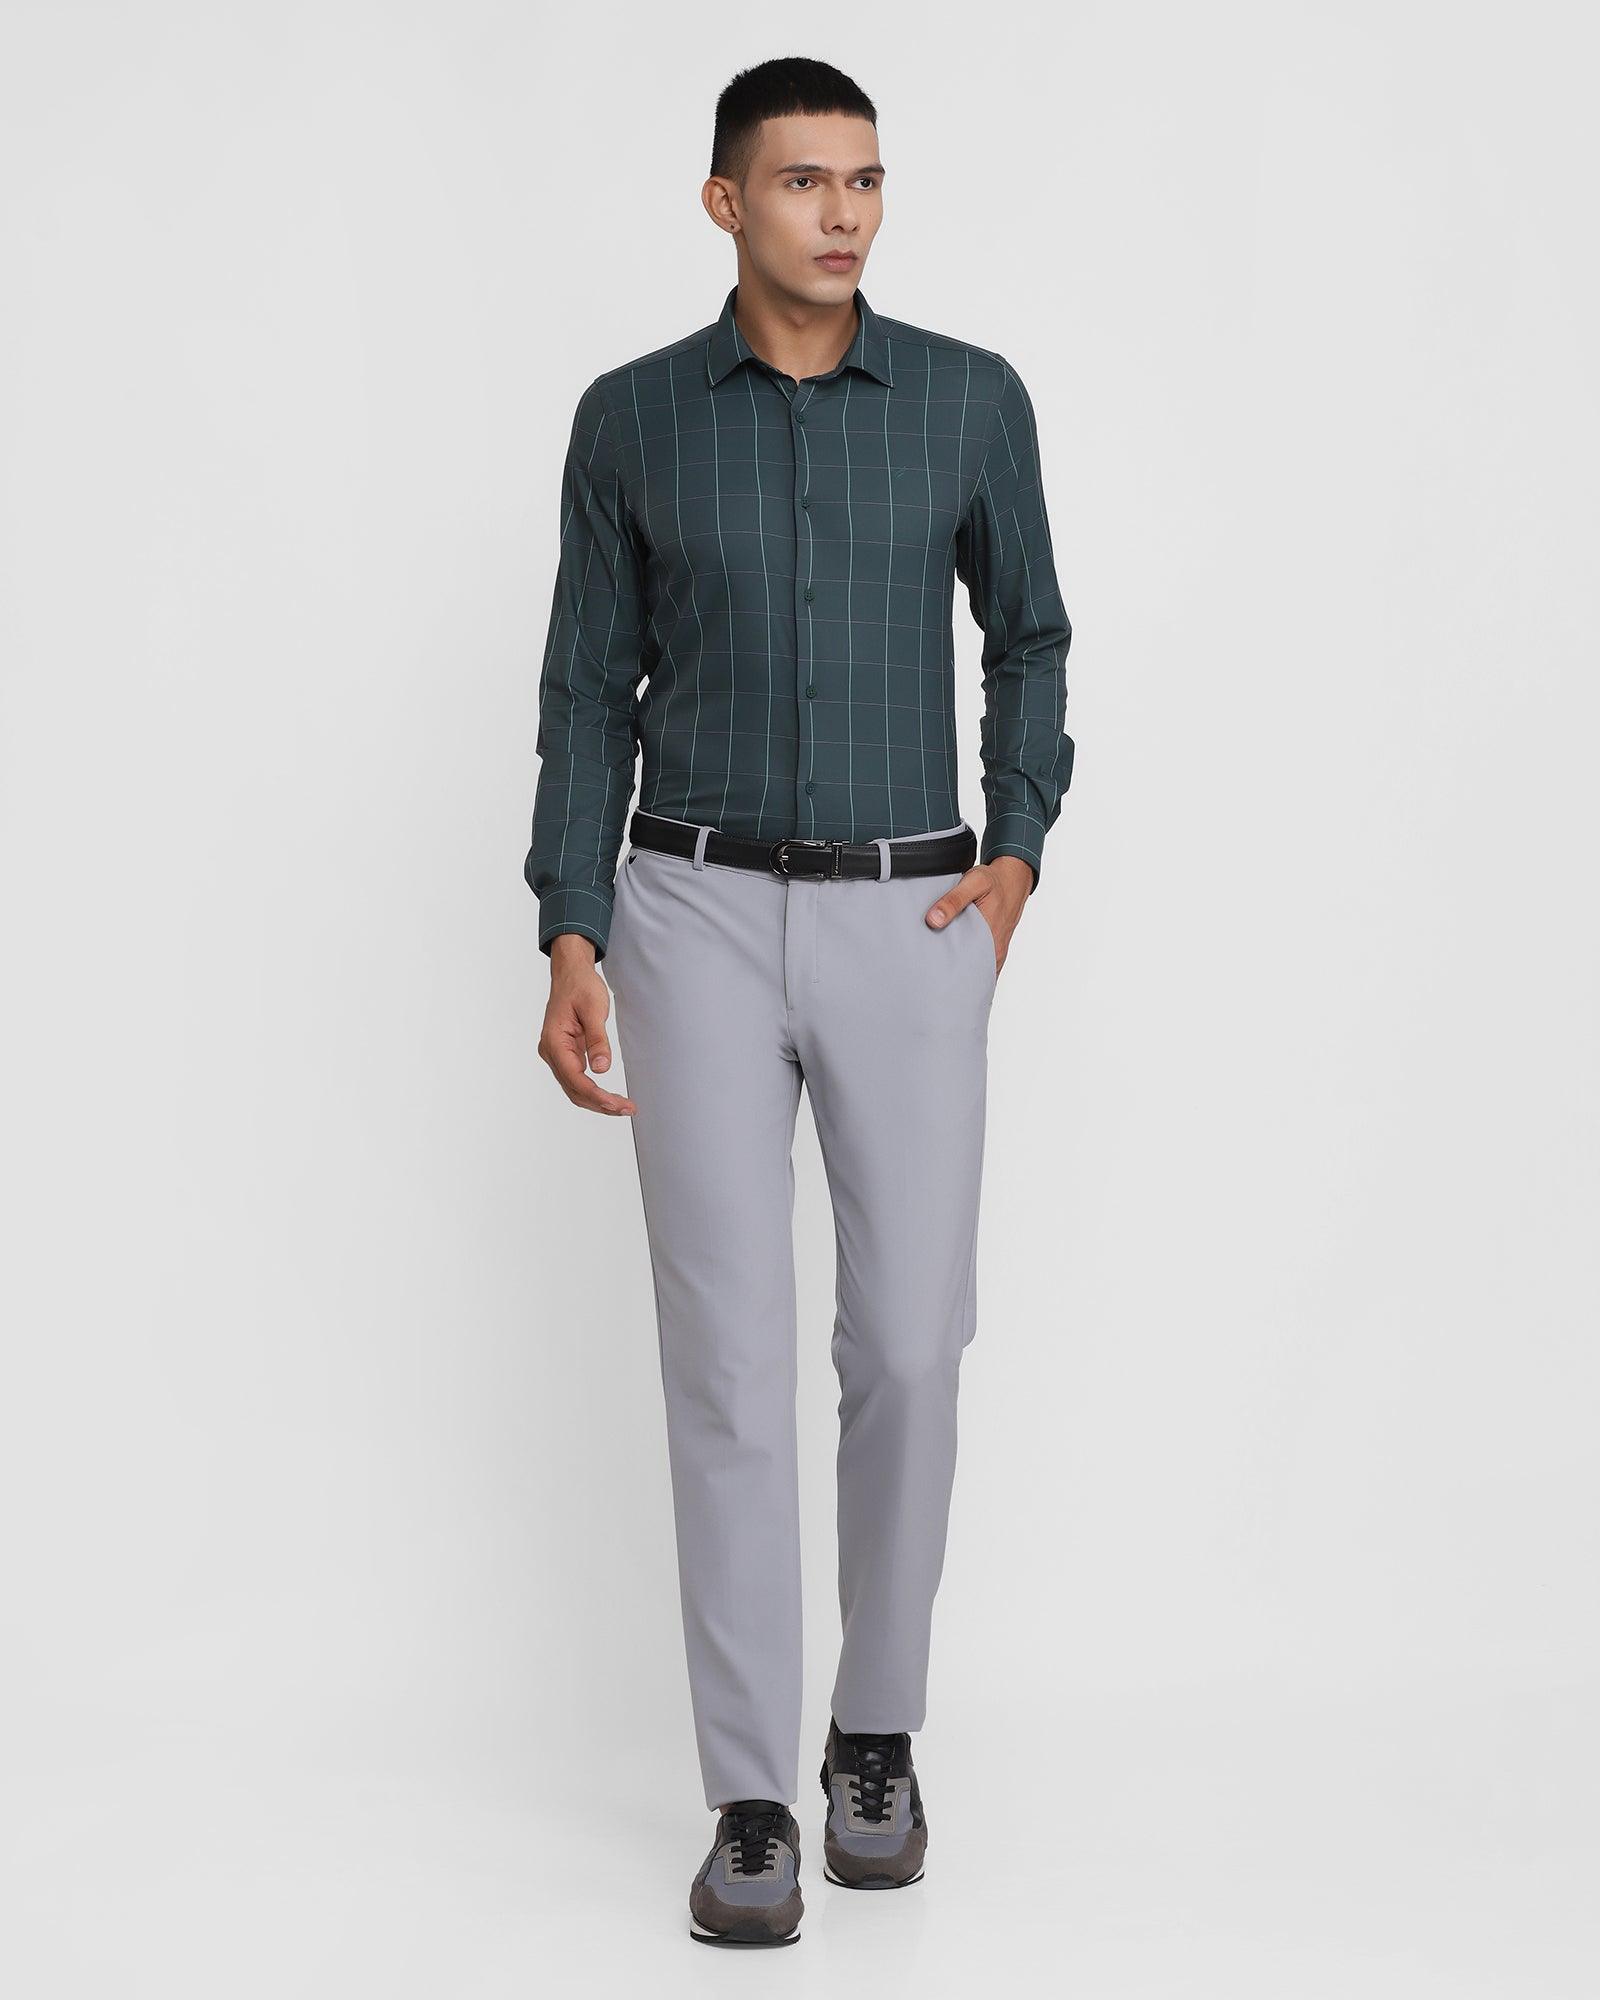 Light Gray Shirt with Brown Trousers | Hockerty